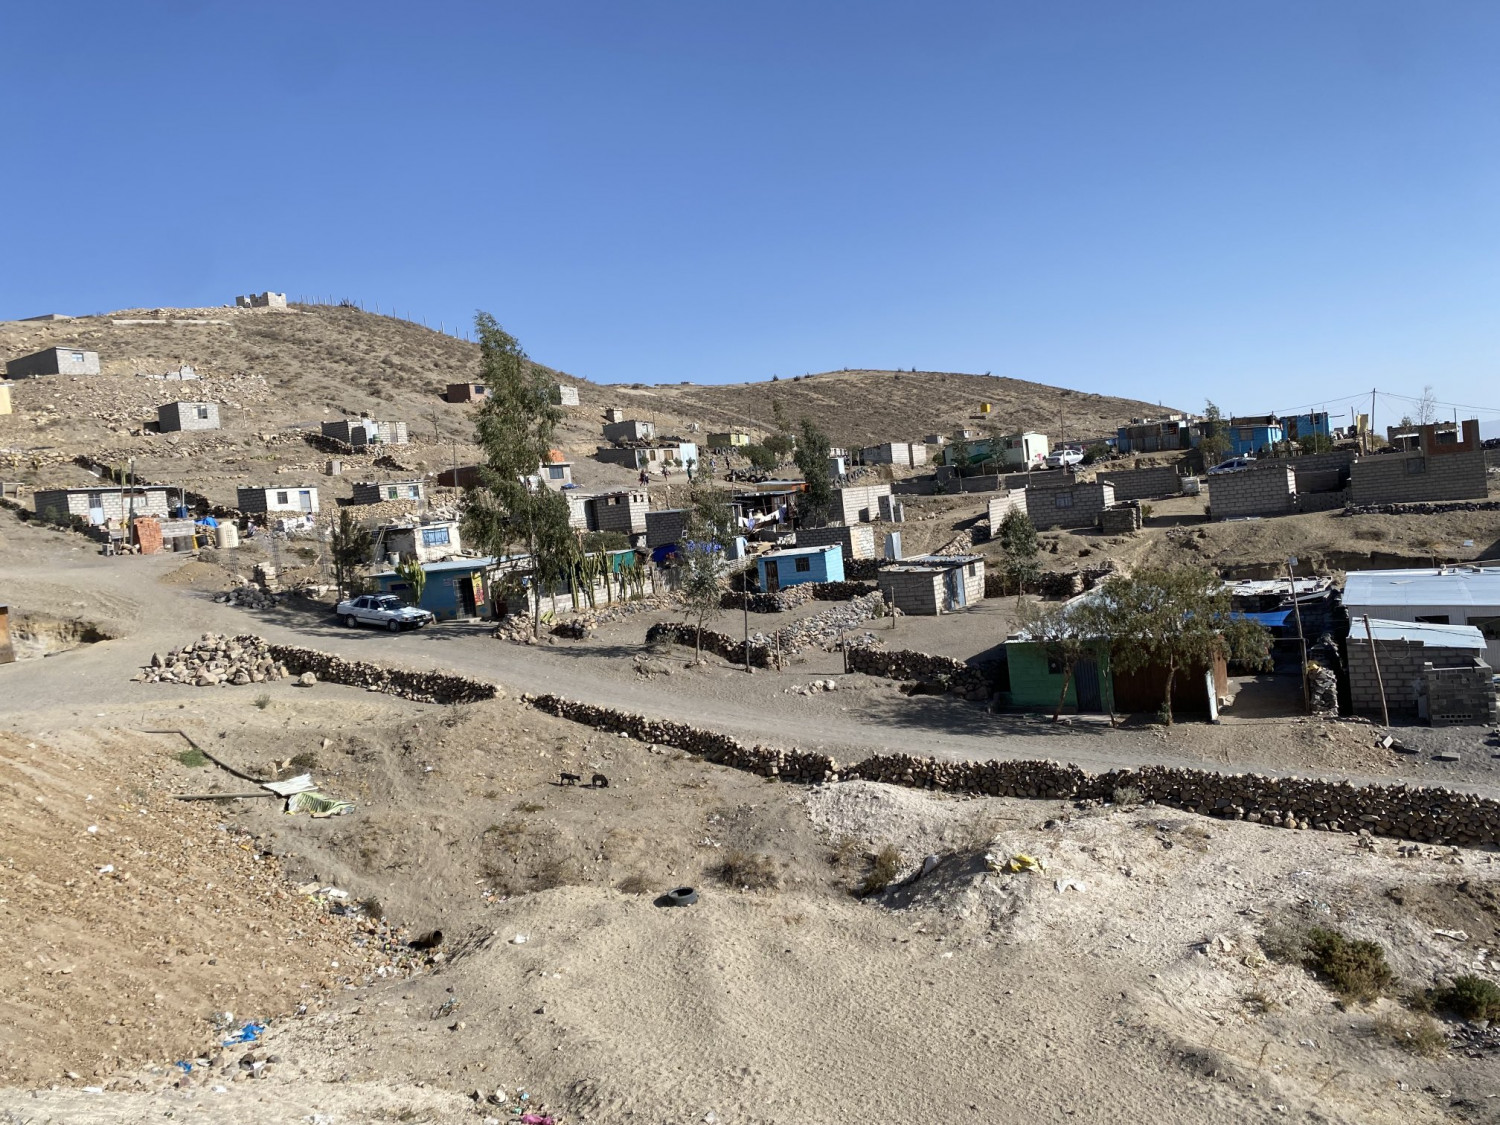 Shanty town in Arequipa